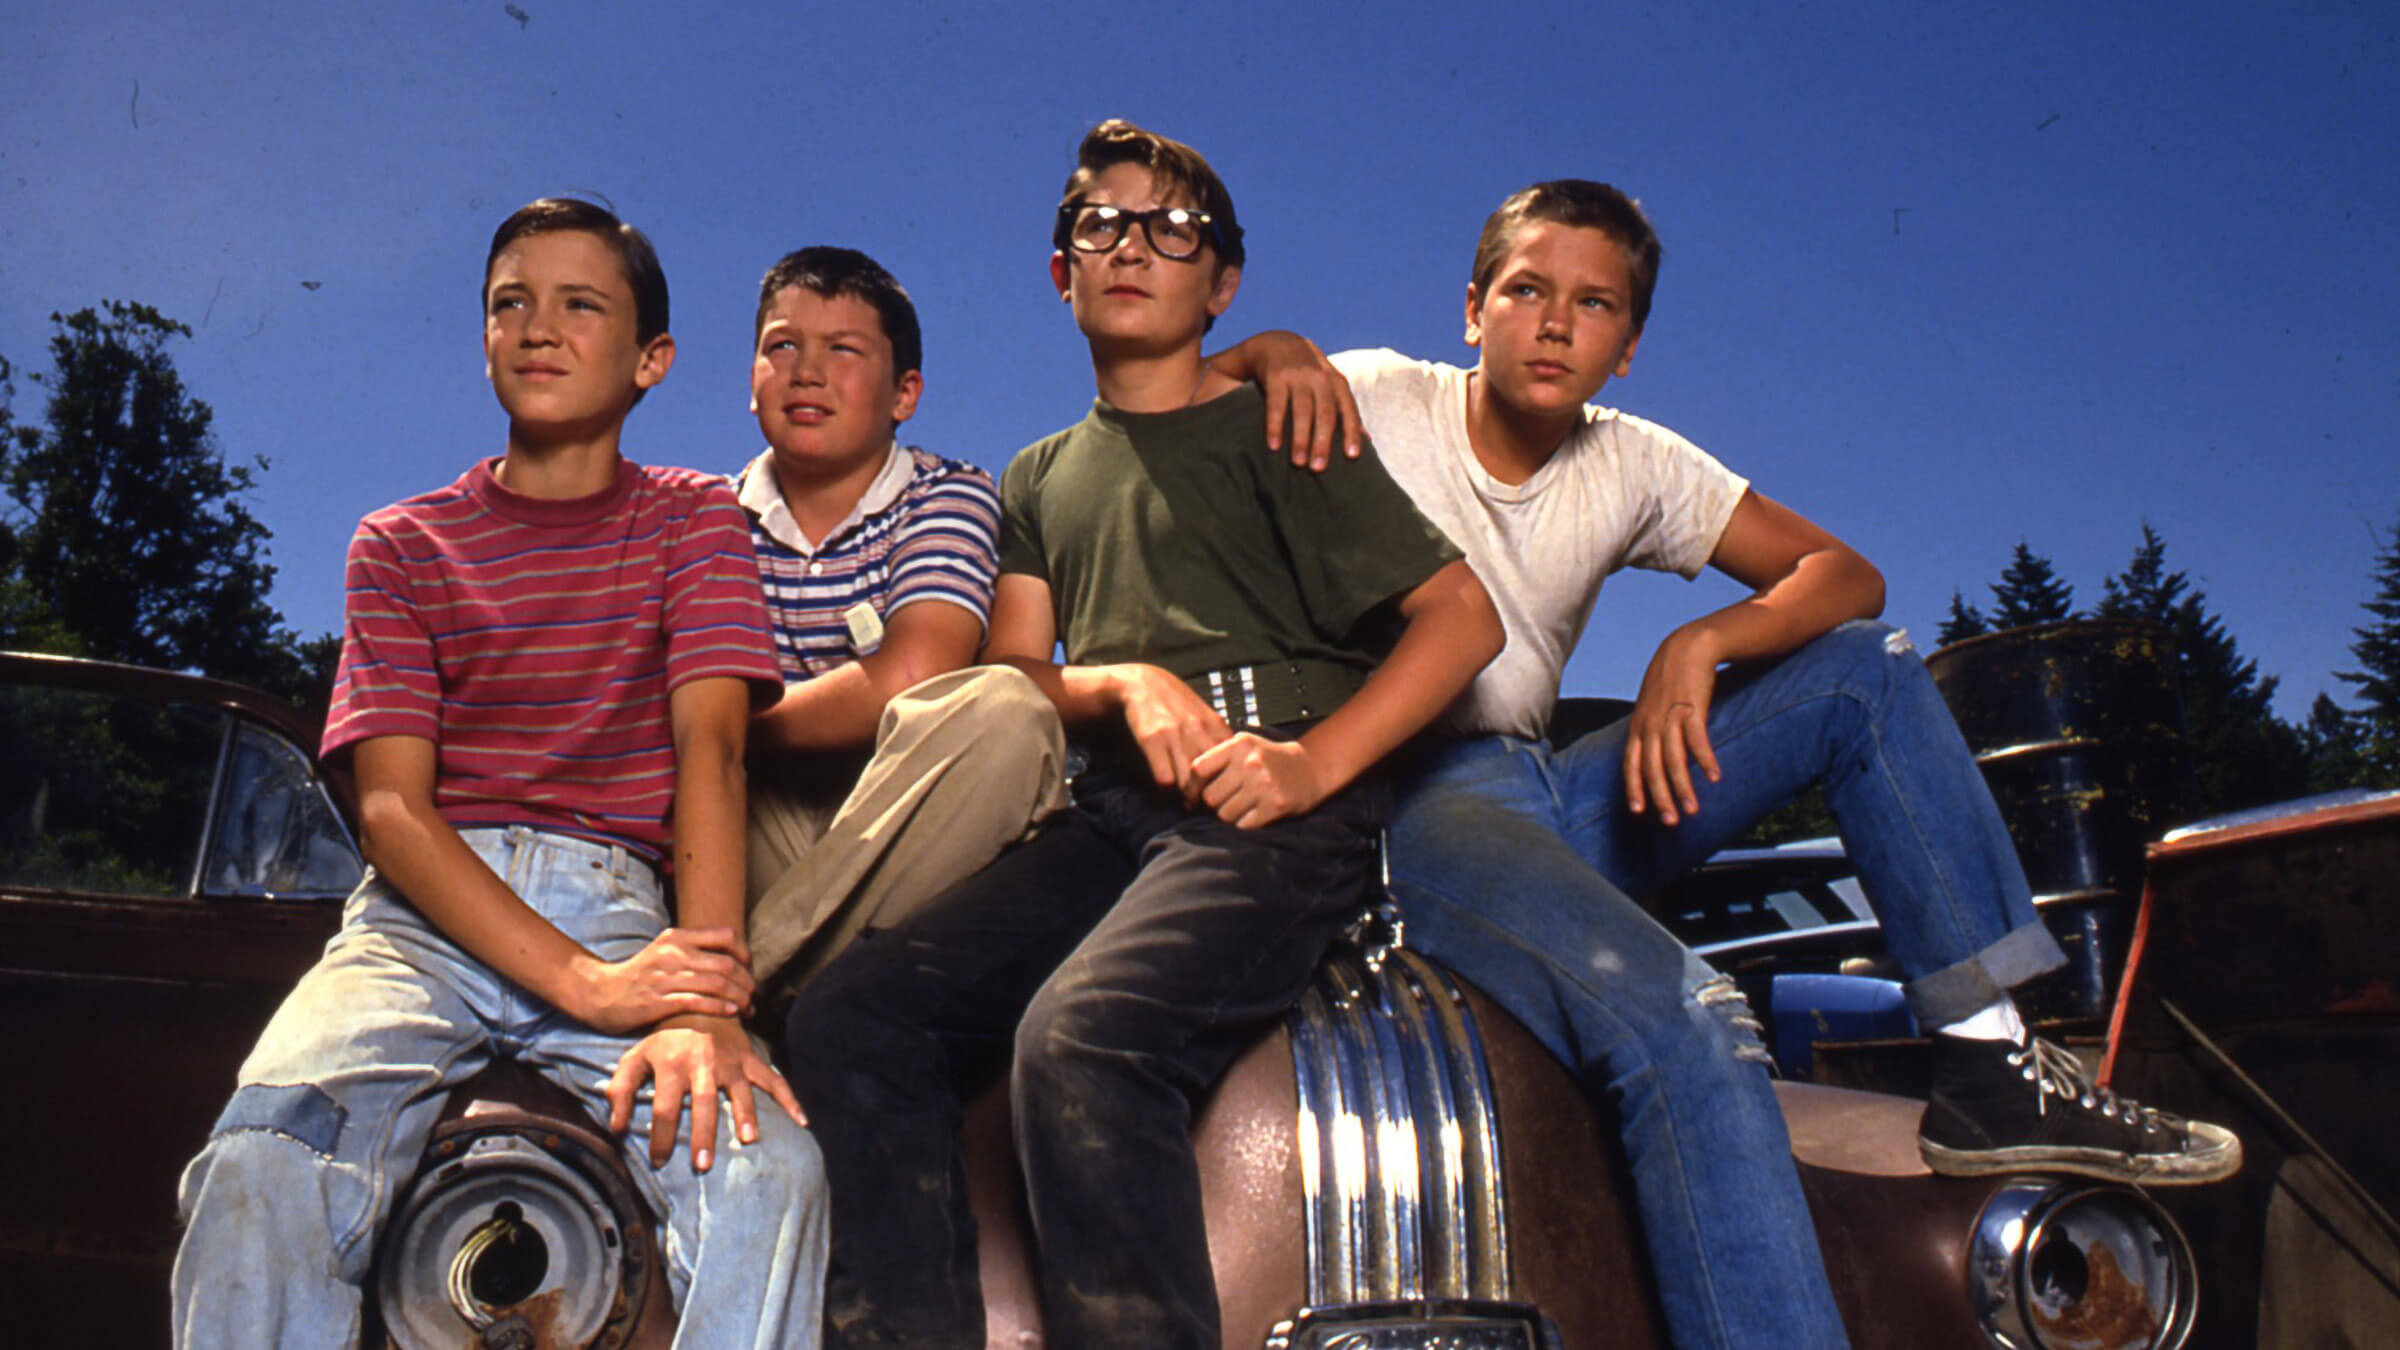 Growing Pains: The Best Coming-of-Age Movies and Scripts